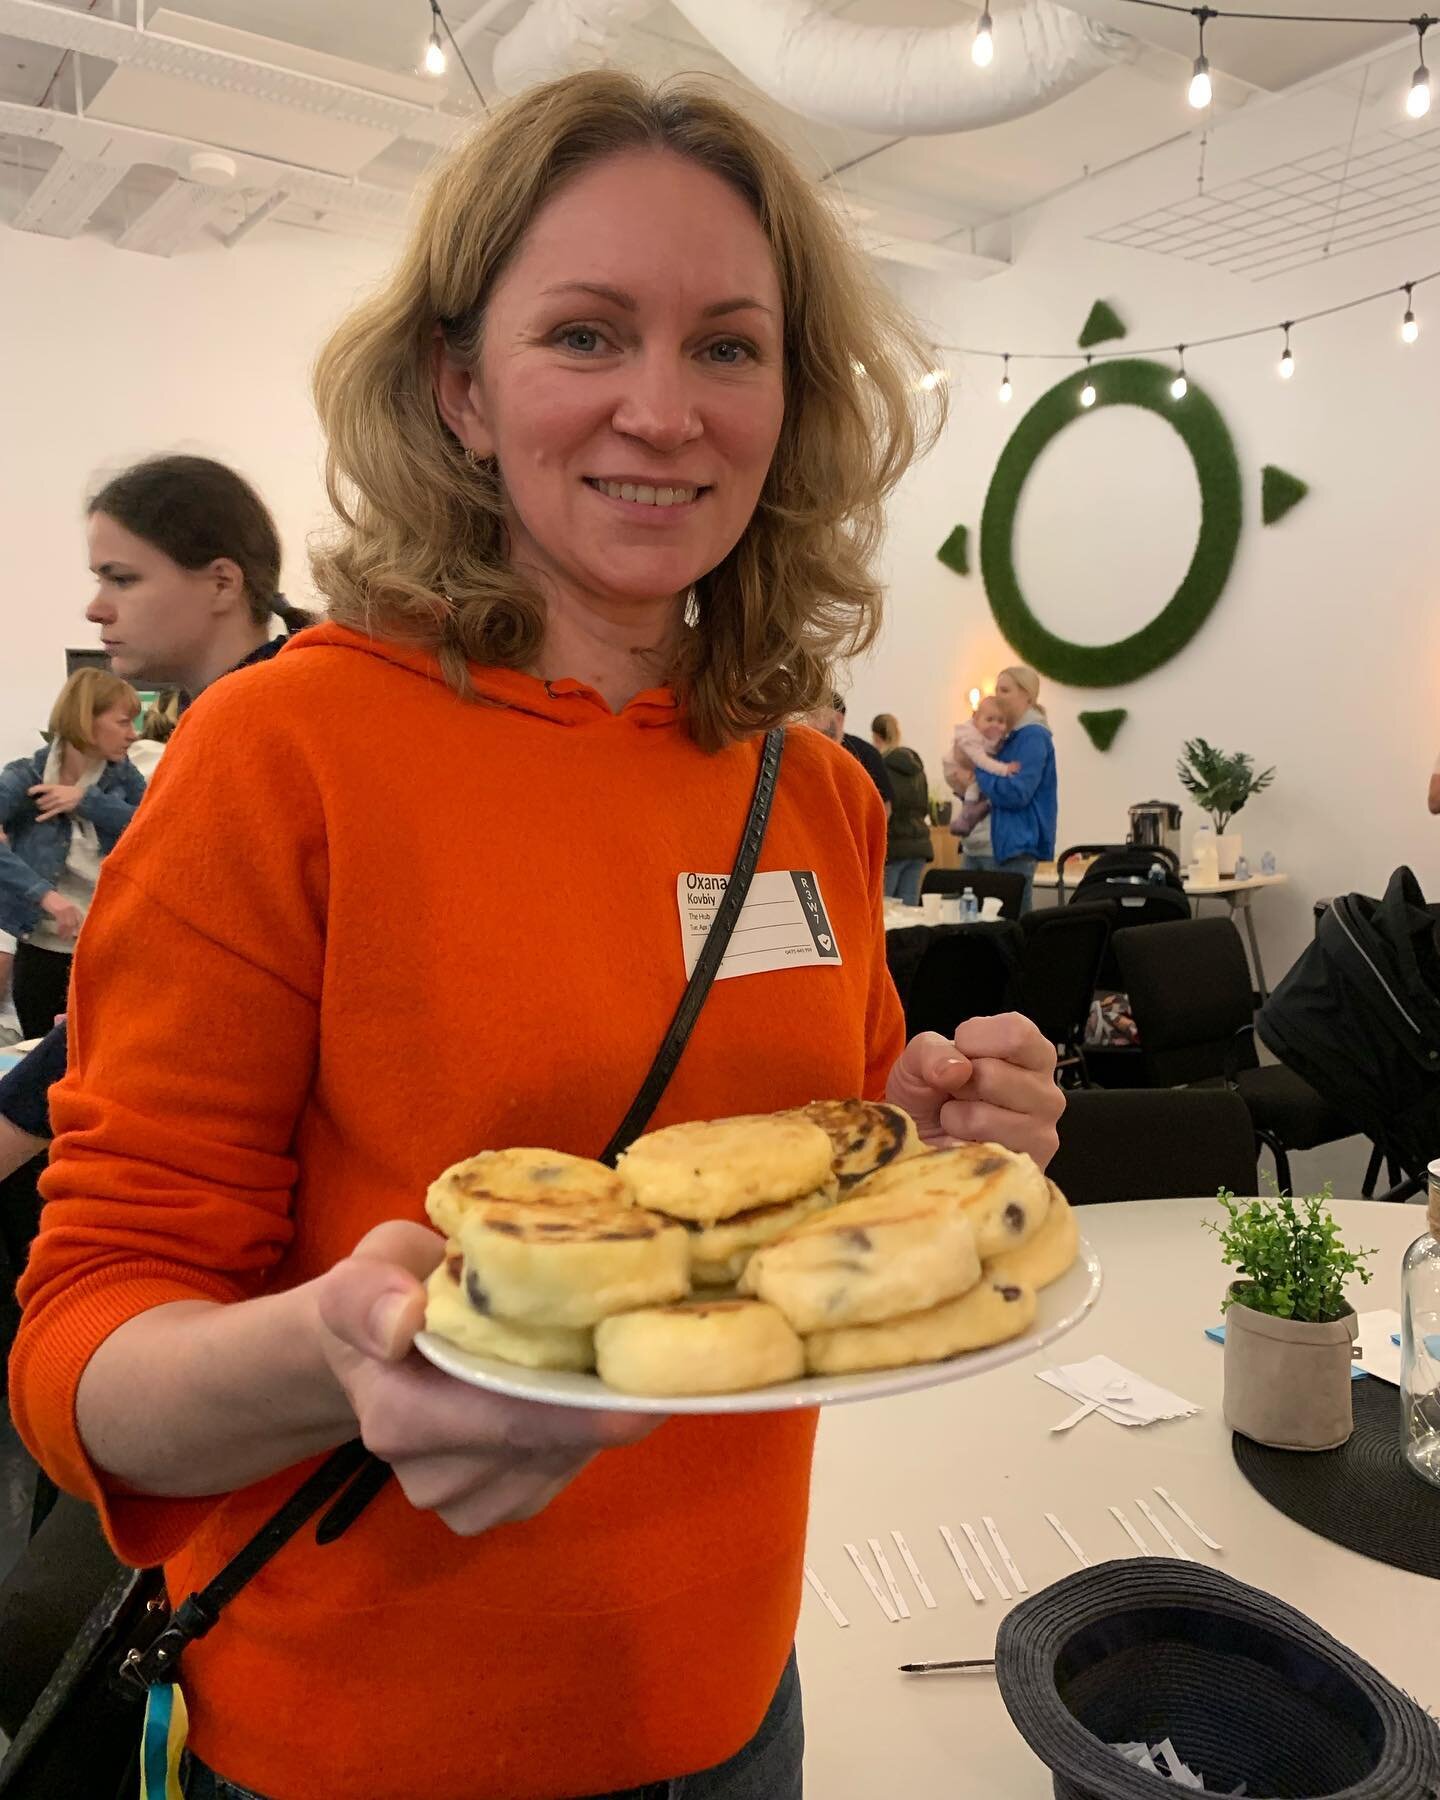 Thank- you to our beautiful volunteer Oxana holding a delicious plate of Ukrainian cottage cheese pancakes at our first Family Fun Night for Ukrainian refugees on April 12th. We look forward to hosting Family Fun Nights every fortnight with Evolve He